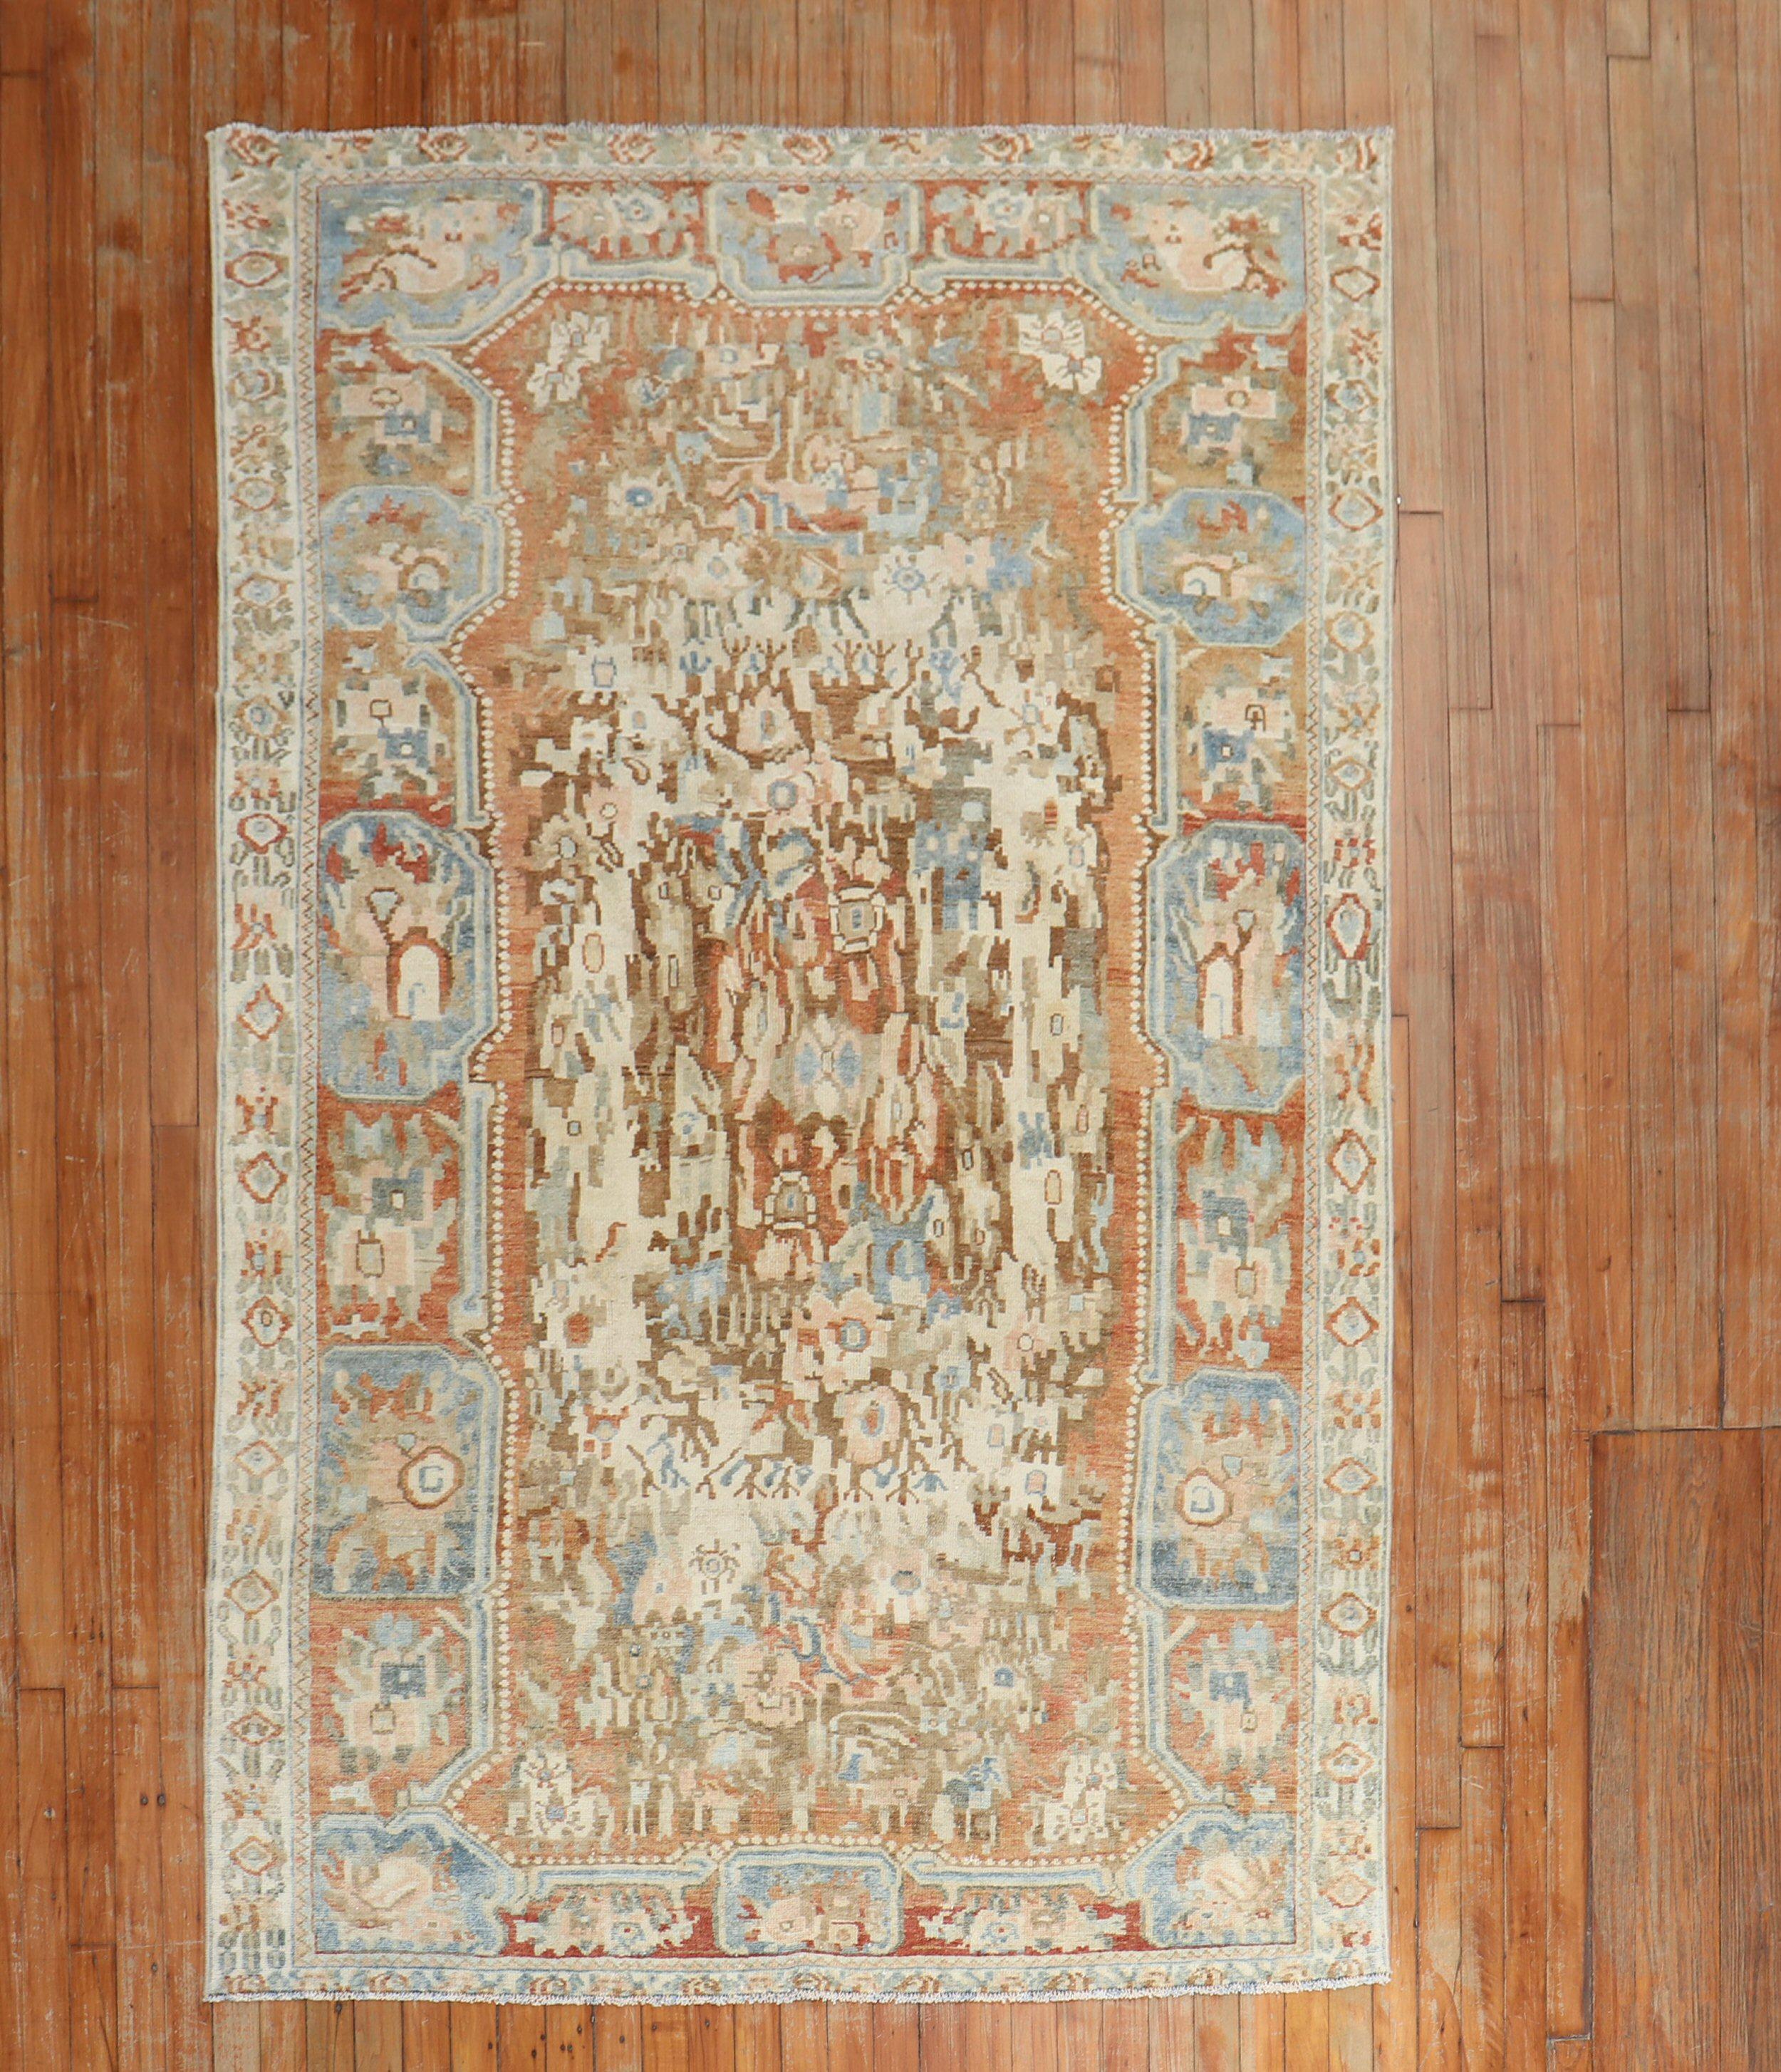 An early 20th Century Russian Karabagh rug with a floral motif in brown, ivory blue, and apricot tones

Measures: 4'9'' x 7'6''.